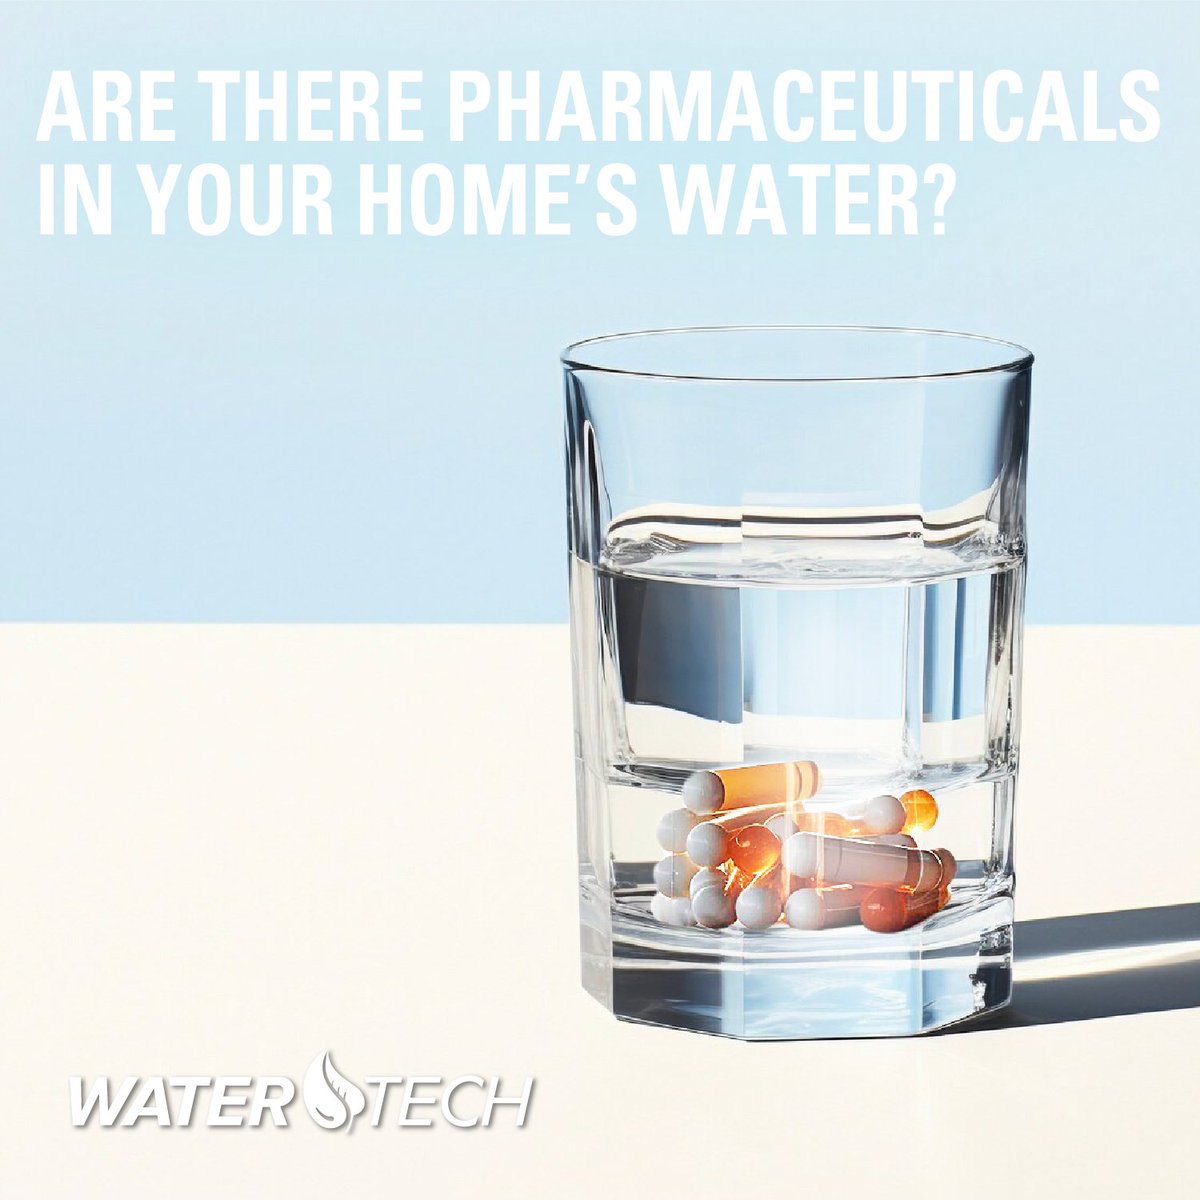 Are there pharmaceuticals lurking in your home's water? It's a concerning reality that traces of medications can find their way into our water supply, potentially affecting your health and well-being.
#WaterSafety #FilteredForHealth #CleanWater #WaterTech #HealthyHome #H2OExpert